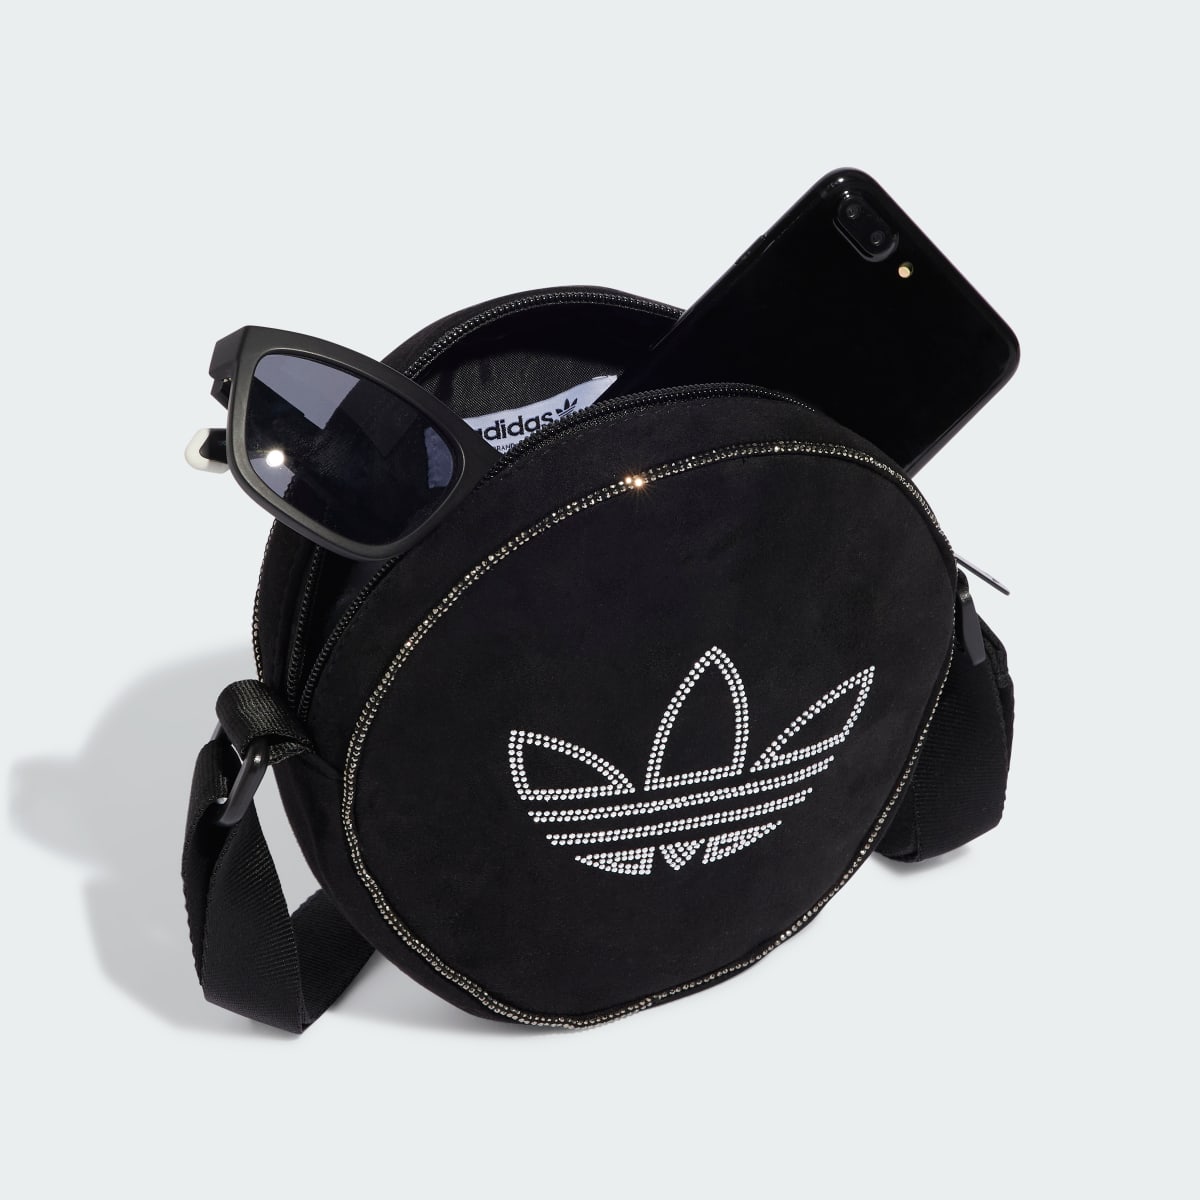 Adidas Sac rond matière synthétique strass. 5